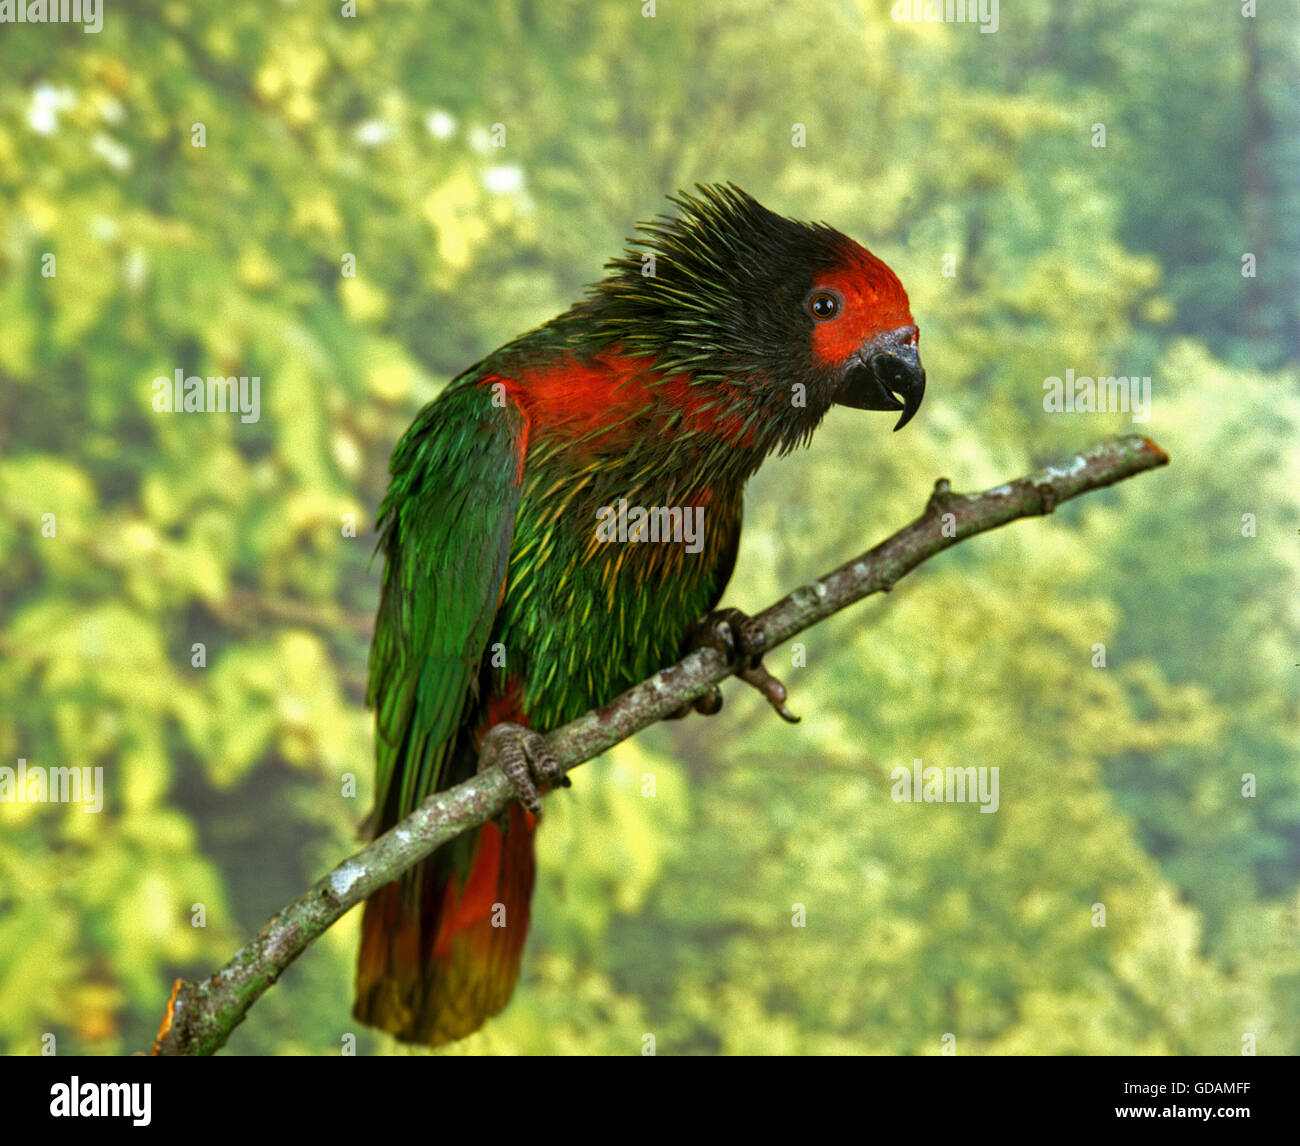 Red Fronted Lorikeet, charmosyna rubronotata, Adult on Branch Stock Photo